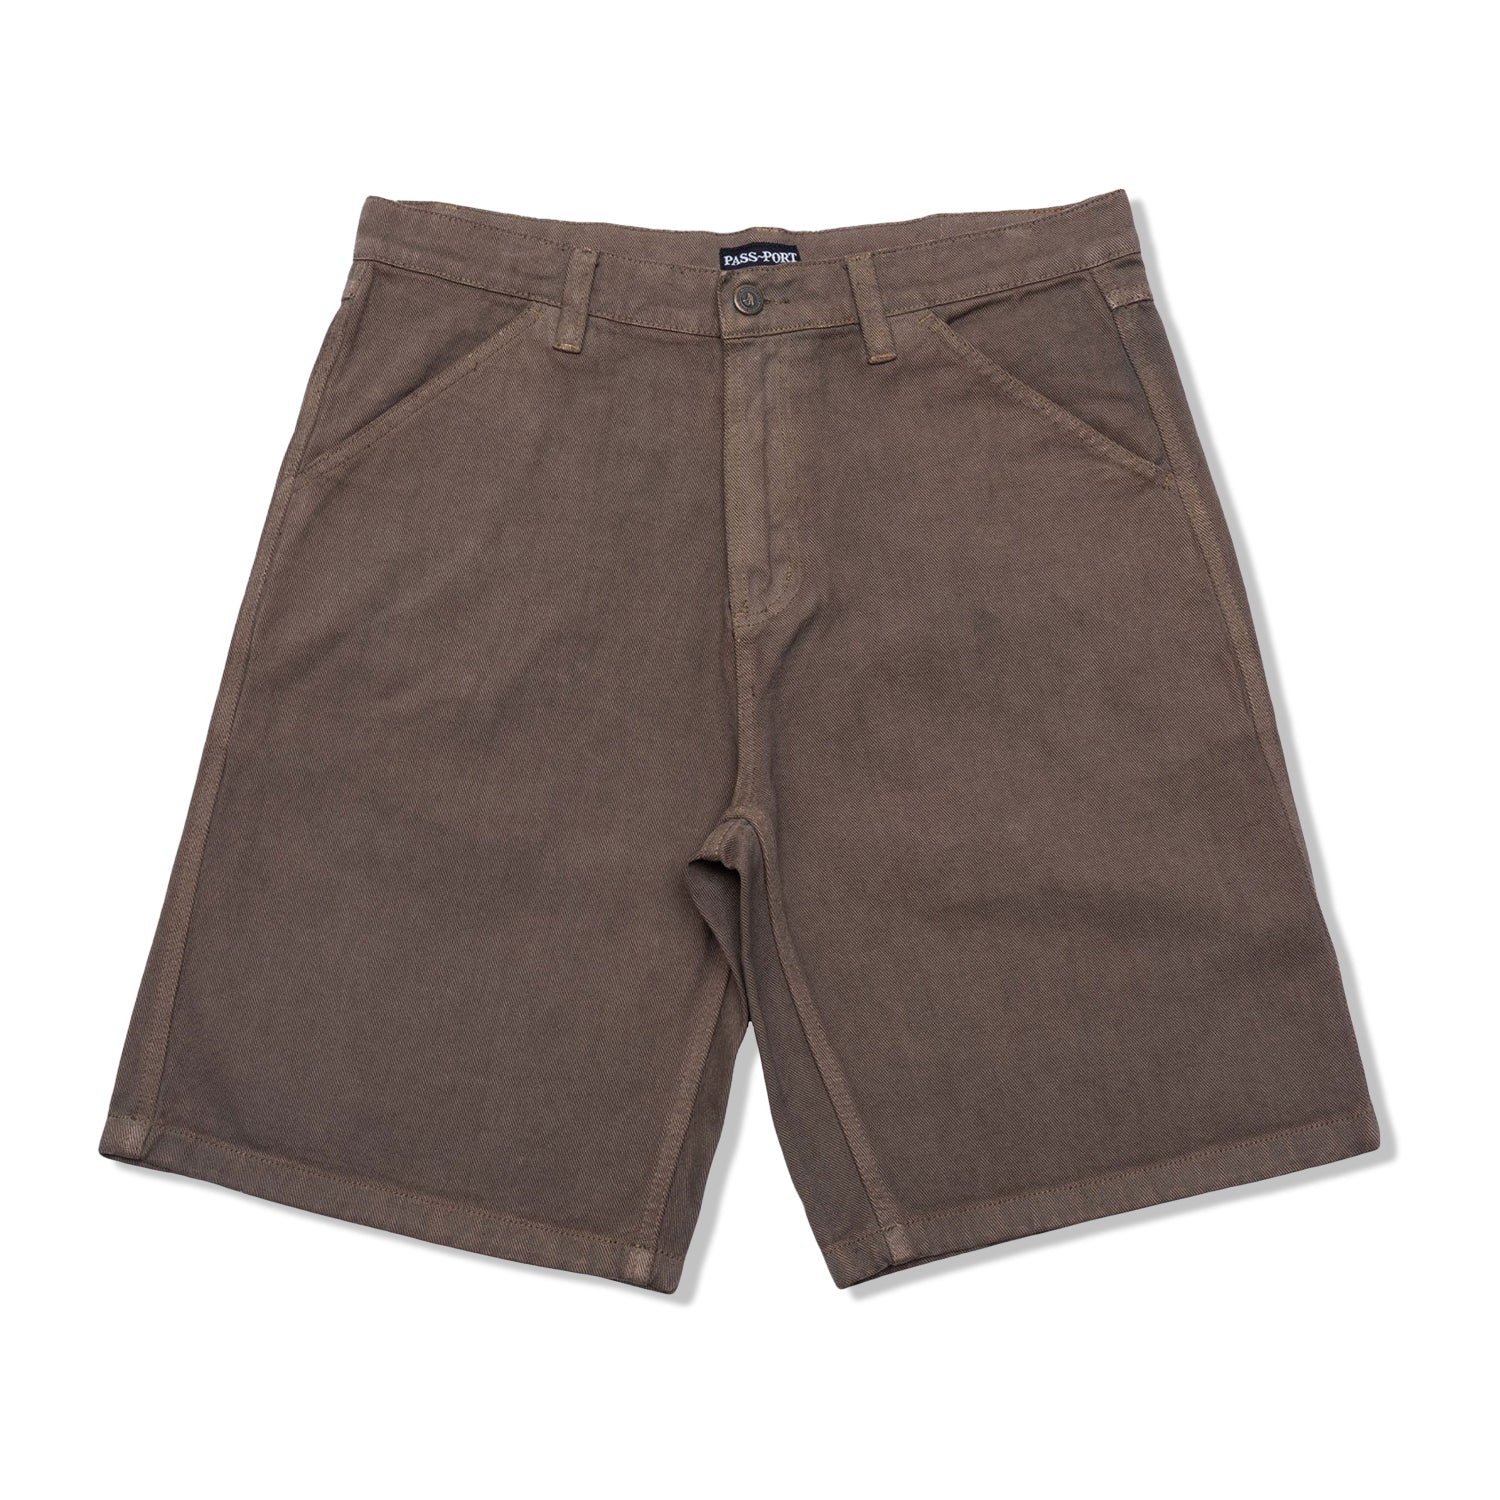 Workers Club Denim Short, Washed Brown